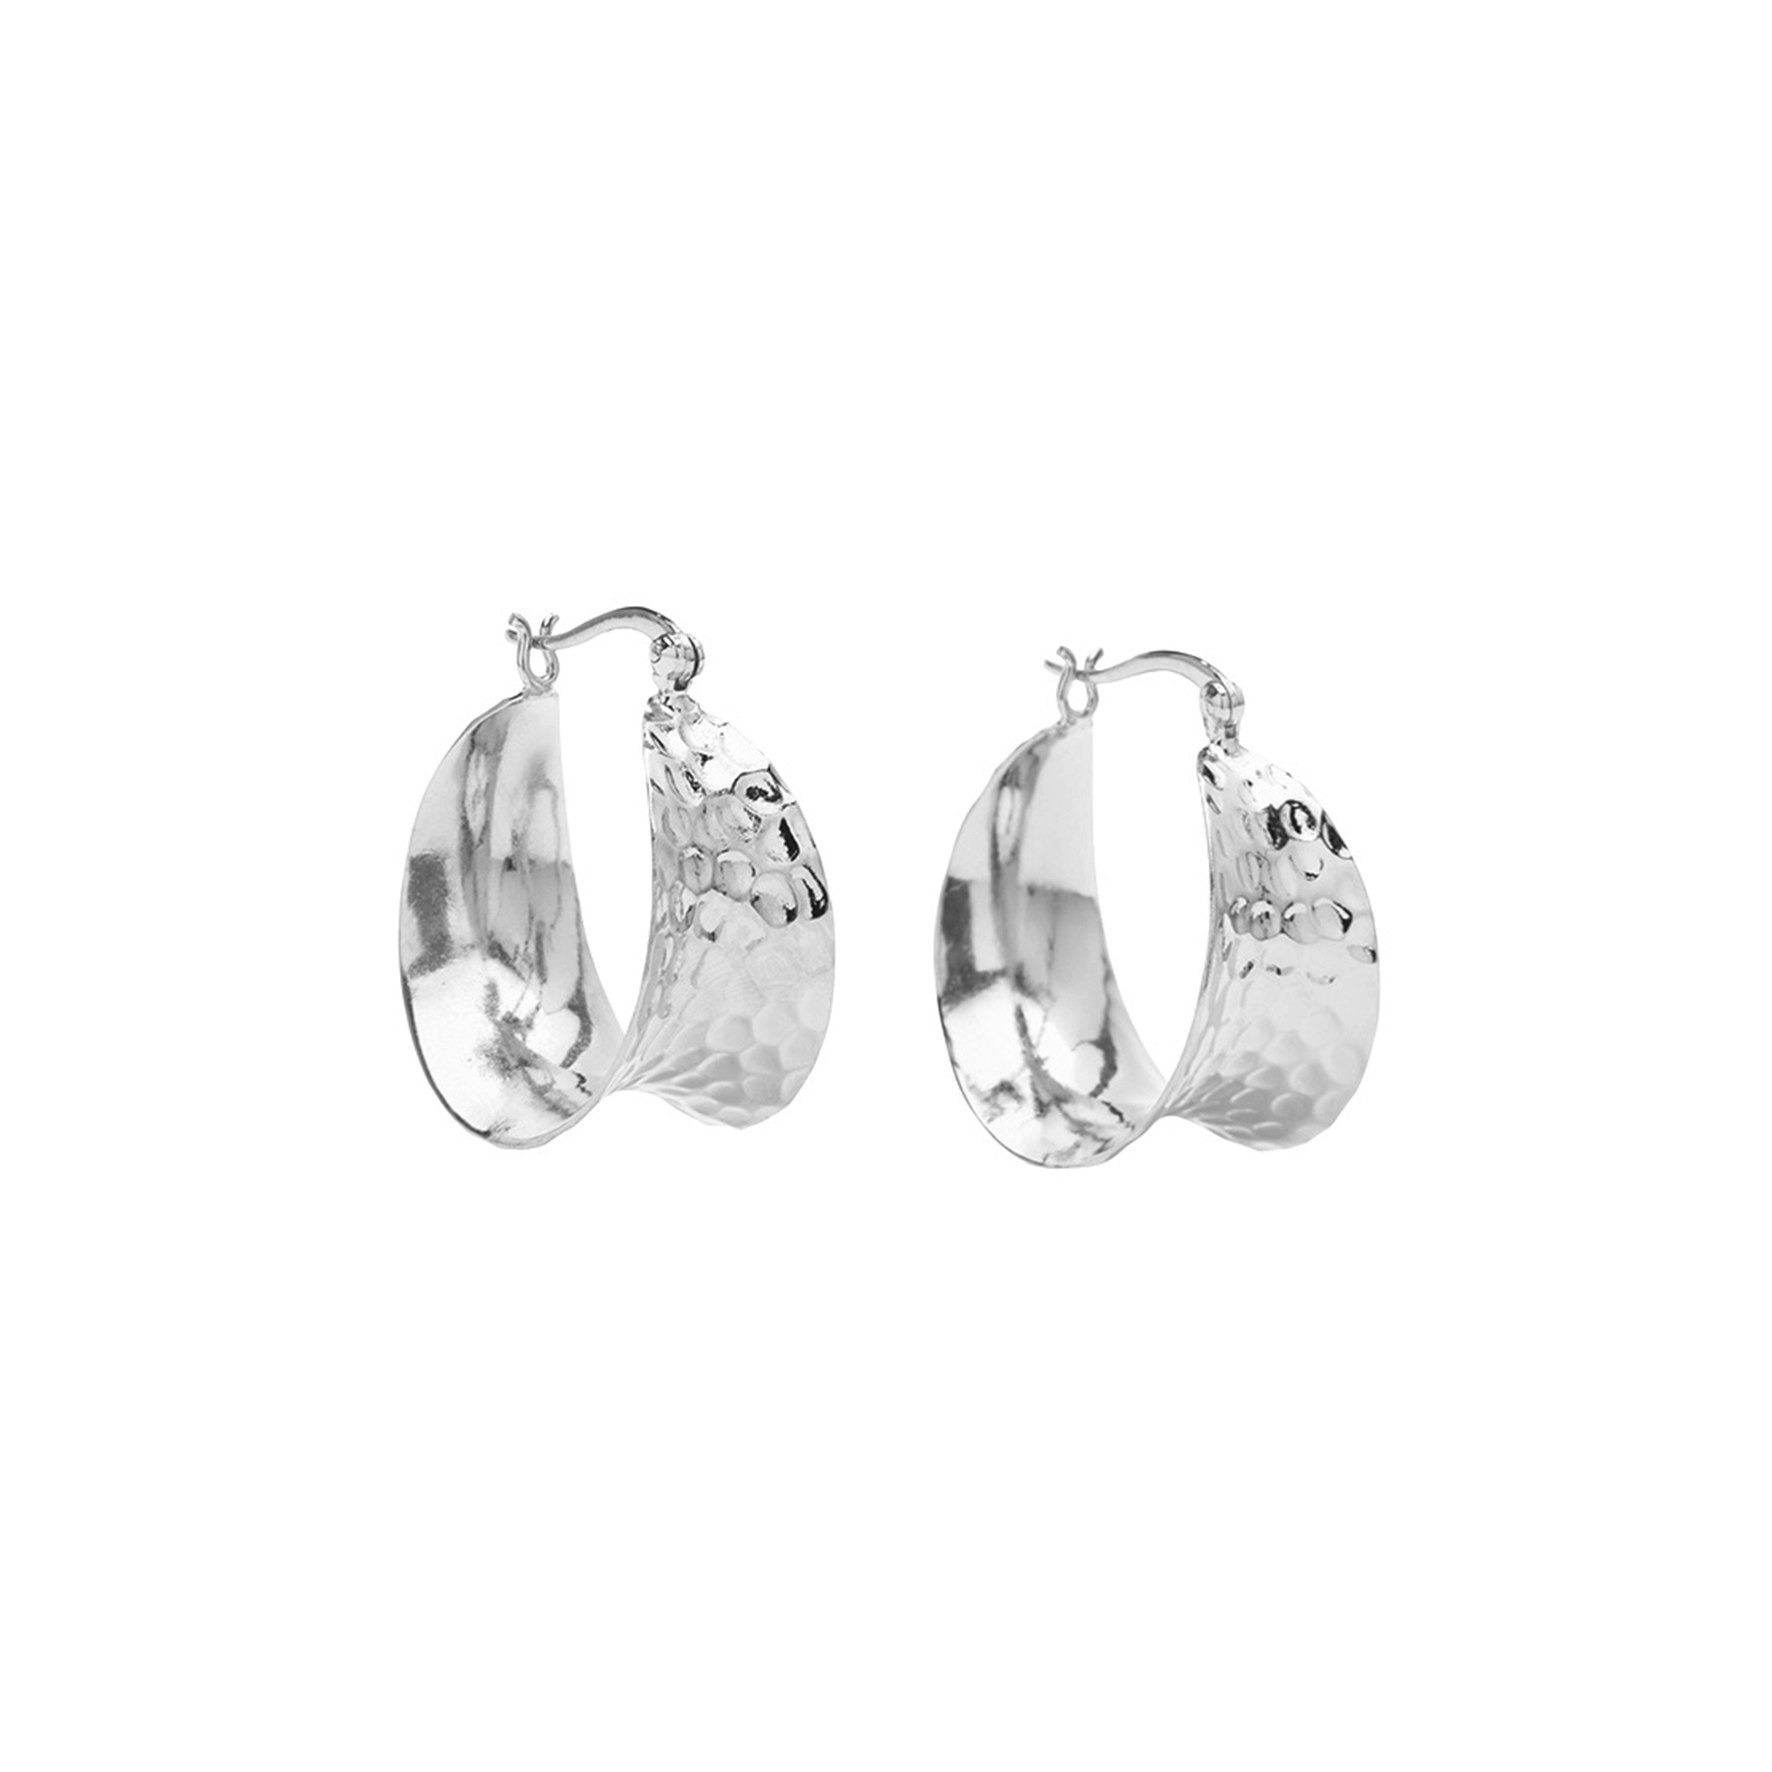 Cleo Grande Hoops from Pico in Silverplated Brass